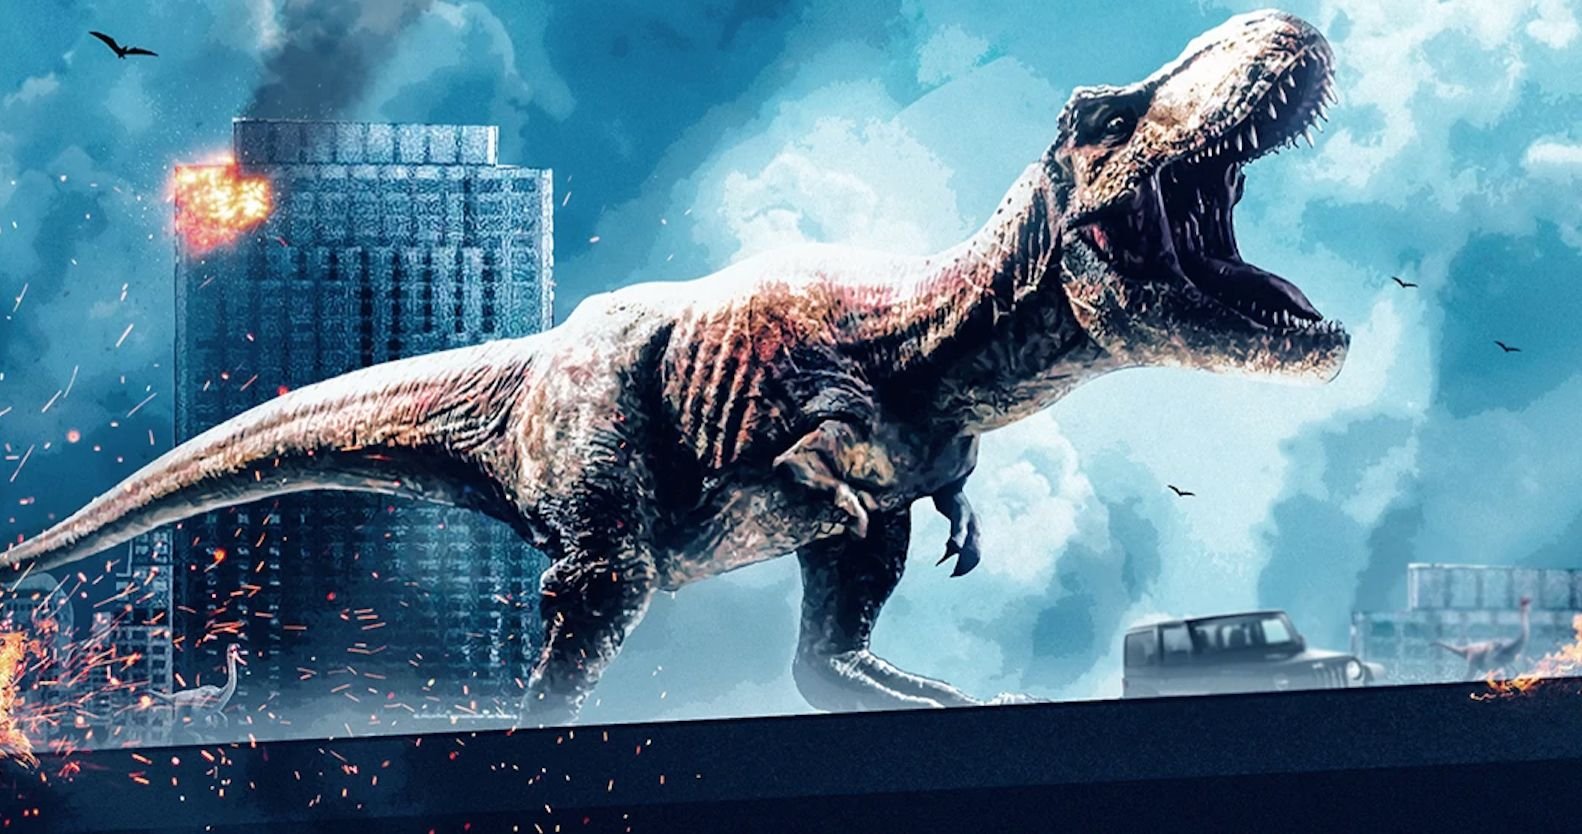 Jurassic World 3 Director Breaks Down Dominion Evolution and Its Inevitable Ending